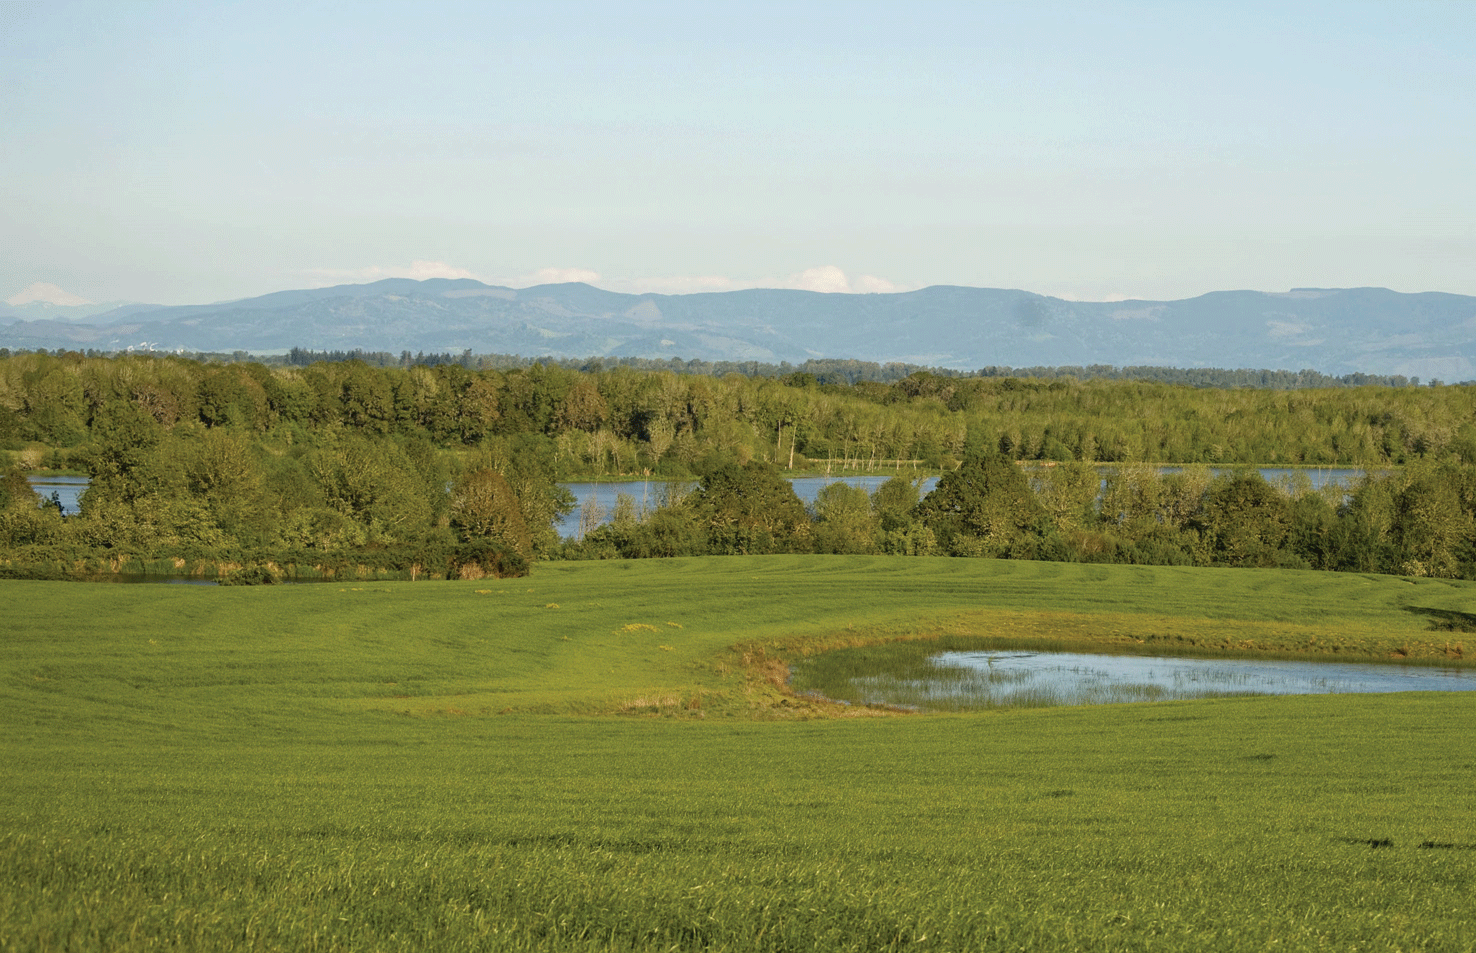 Oregon’s Willamette Valley is home to agricultural land, grassland, forests, waterways,
                        and wetlands, along with diverse wildlife and plant species. Image credit: George
                        Gentry, U.S. Fish and Wildlife Service.